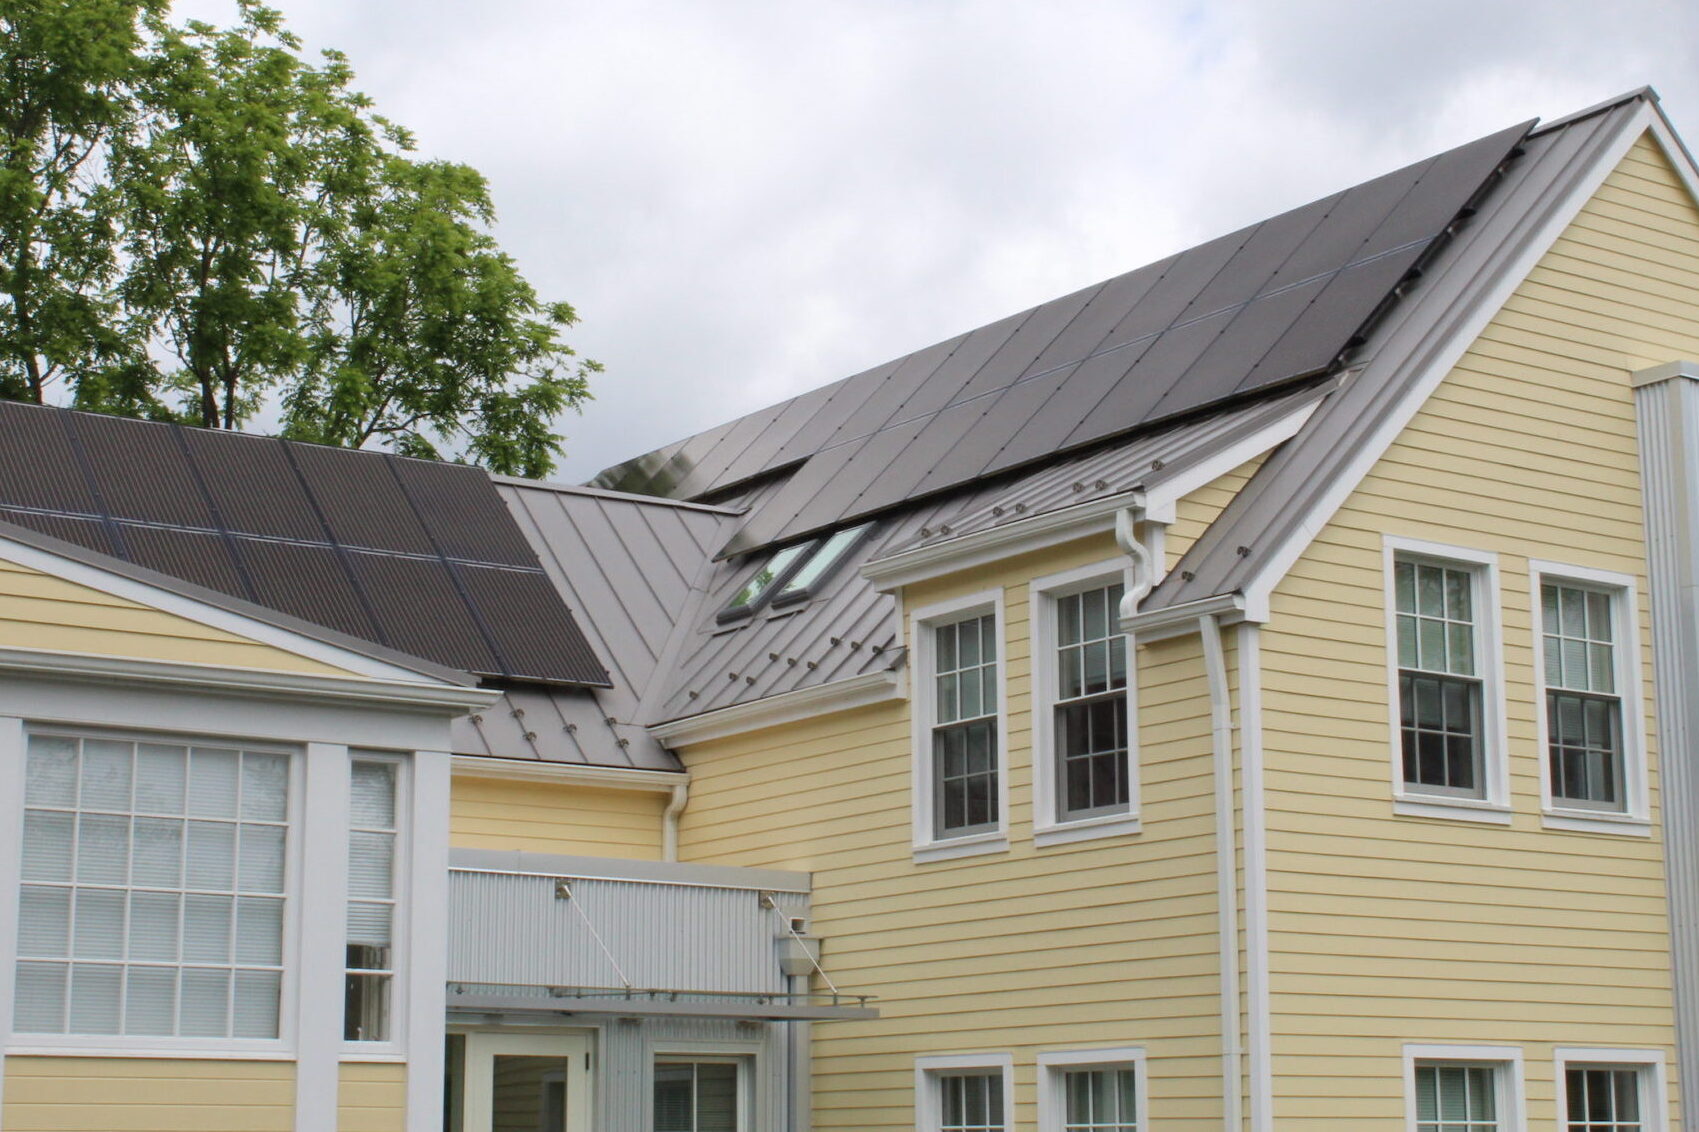 Through distributed/shared solar, low-to-moderate income Virginians will be able to greater participate in solar programs and offset all or a majority of the costs of a solar energy system. Image Credit: Piedmont Environmental Council (PEC)